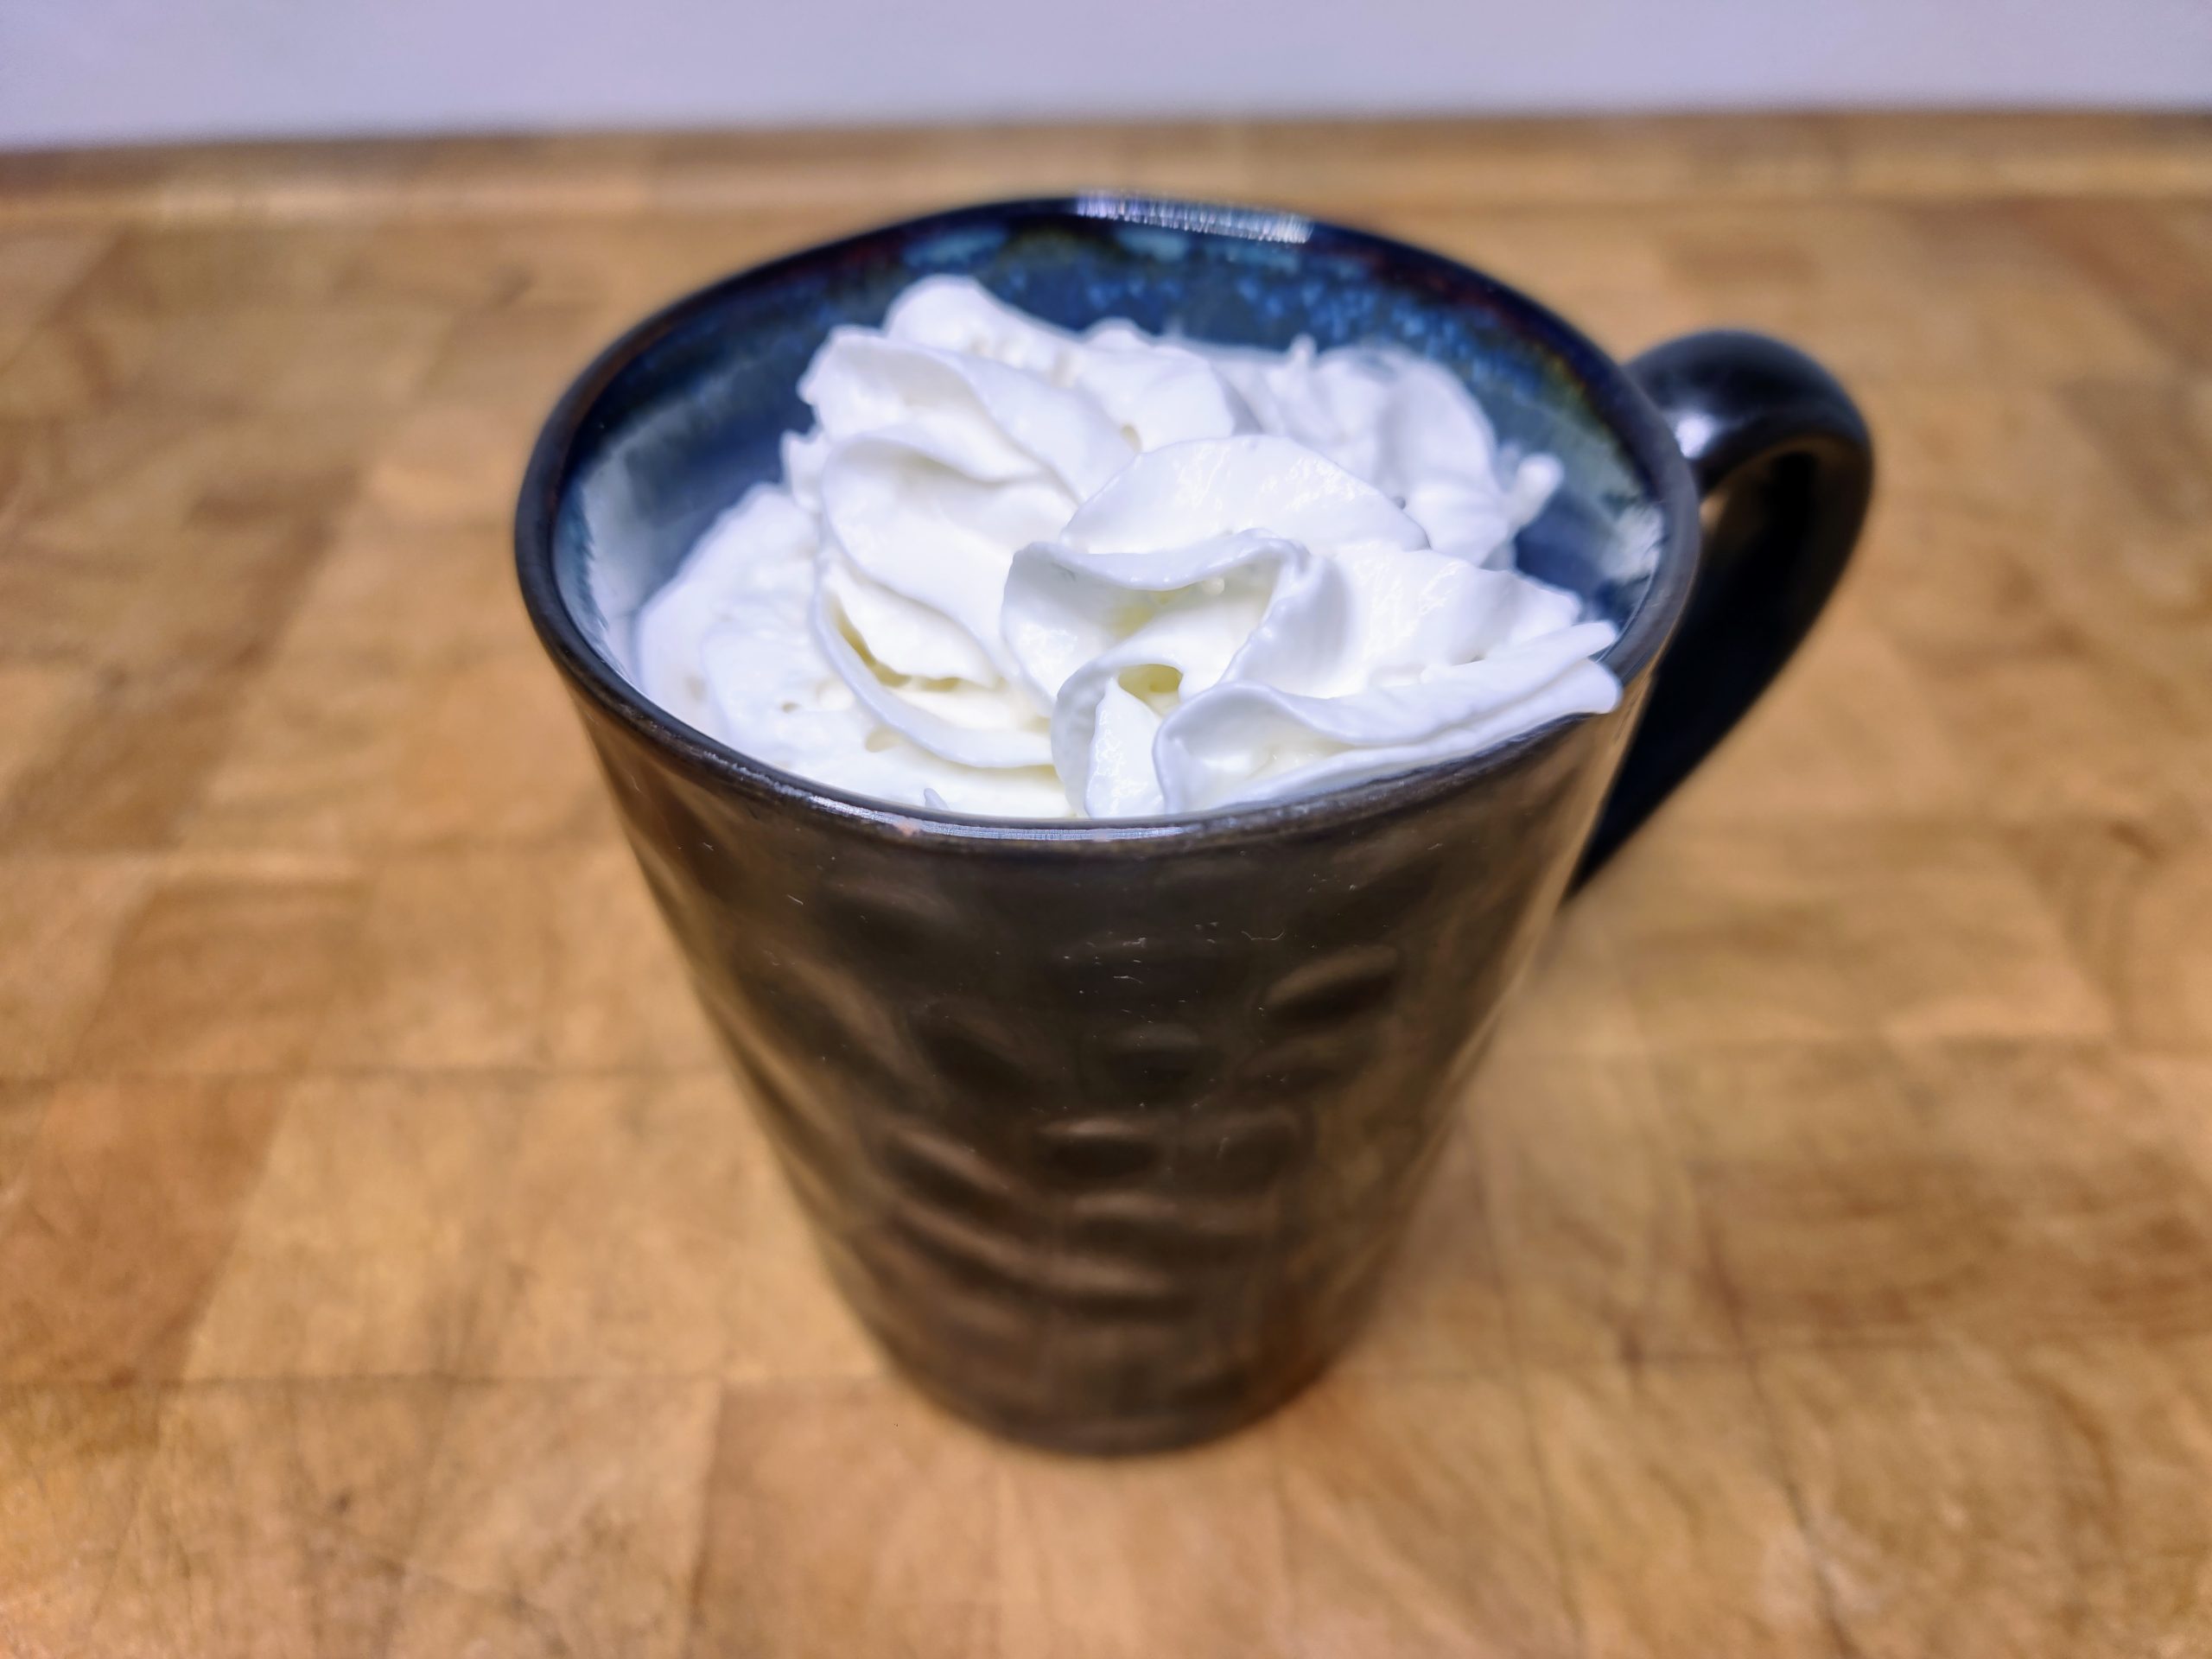 Whiskey hot chocolate in a mug topped with whipped cream on a wooden table.